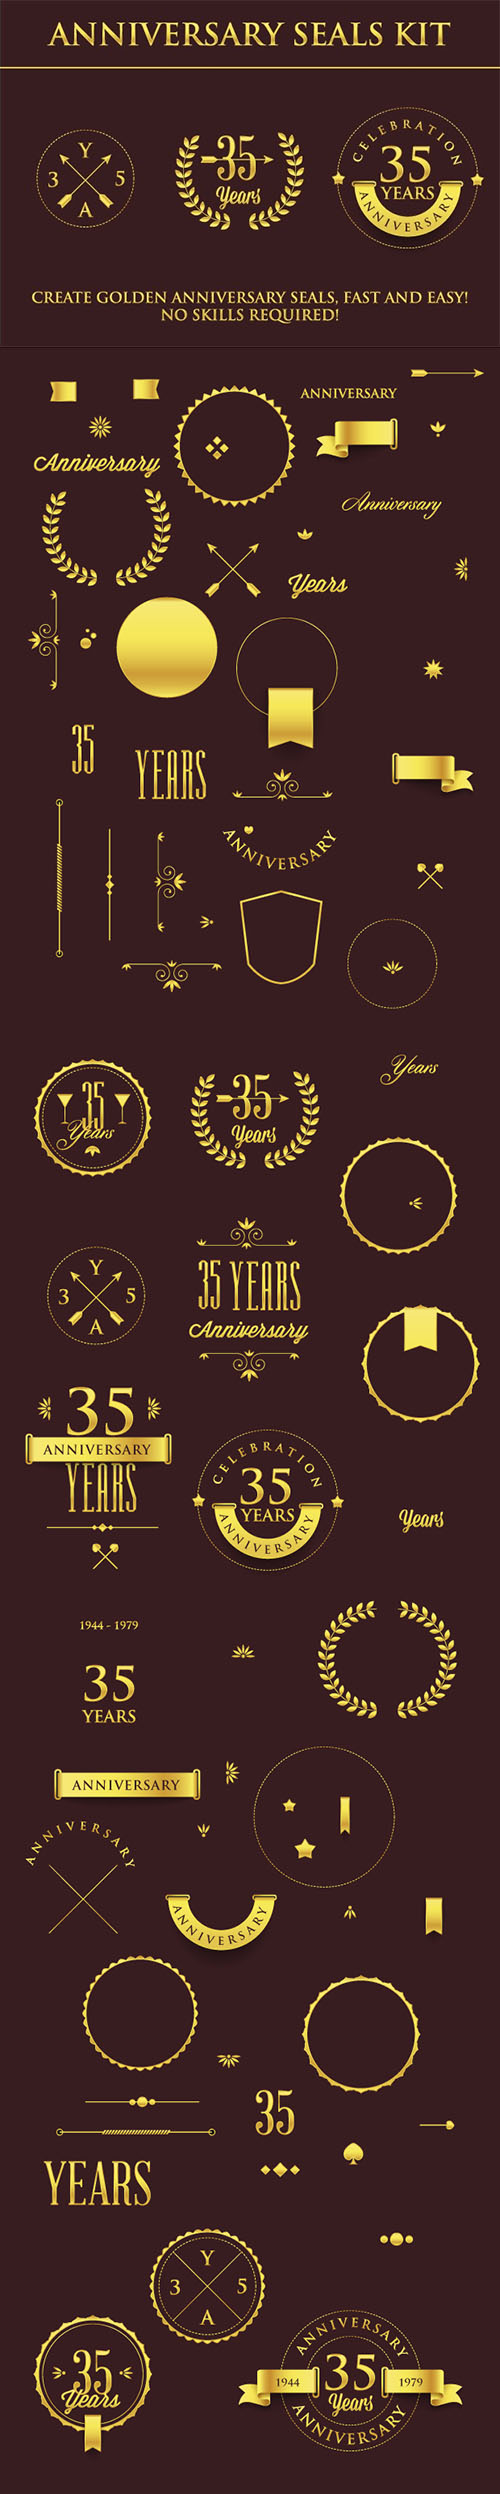 Designtnt - Anniversary Sign Collection